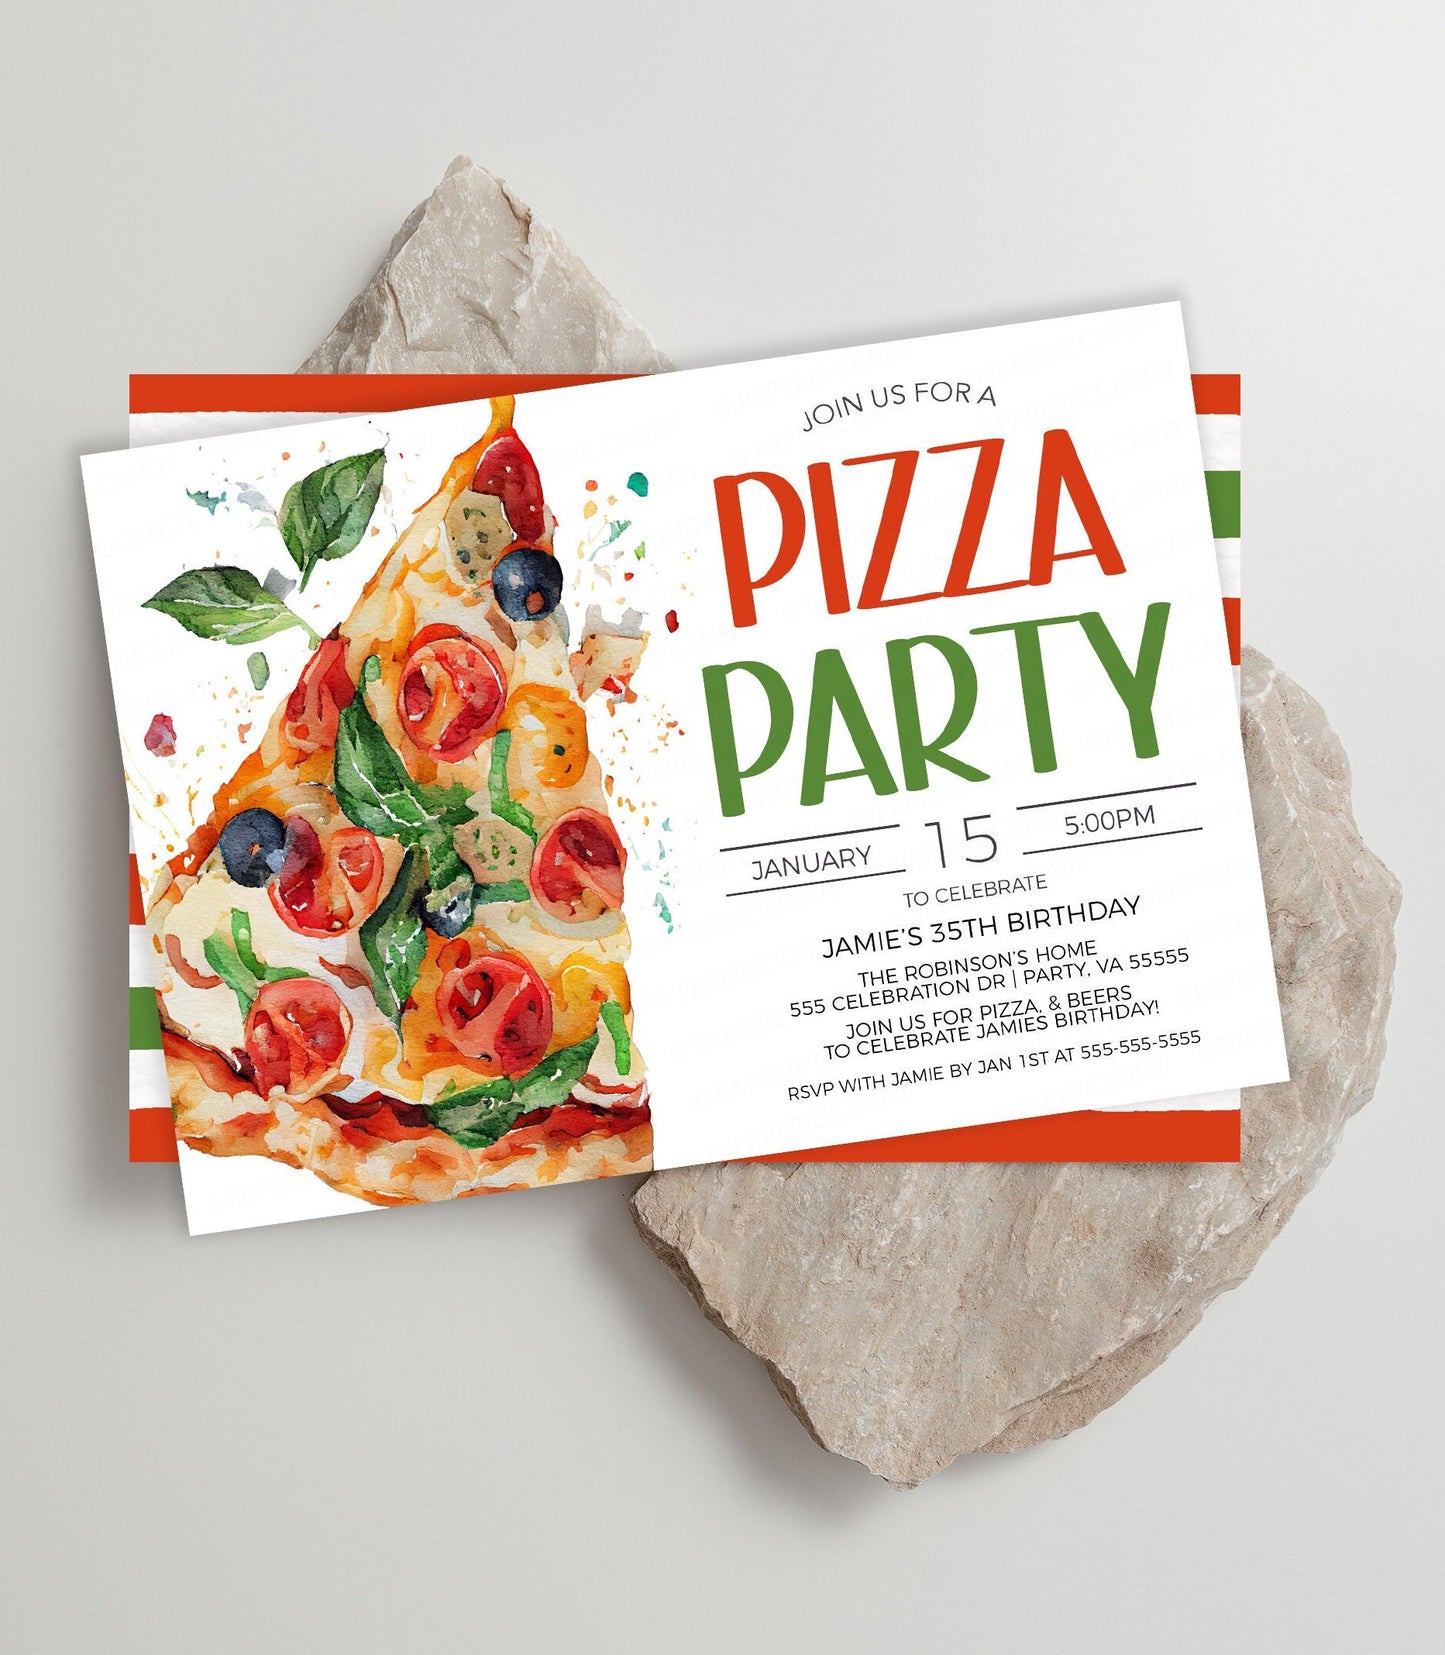 Pizza Party Invitation, Pizza Party Invite, Pizza Birthday Party, Client Customer Staff Employee Volunteer, Editable Printable Template